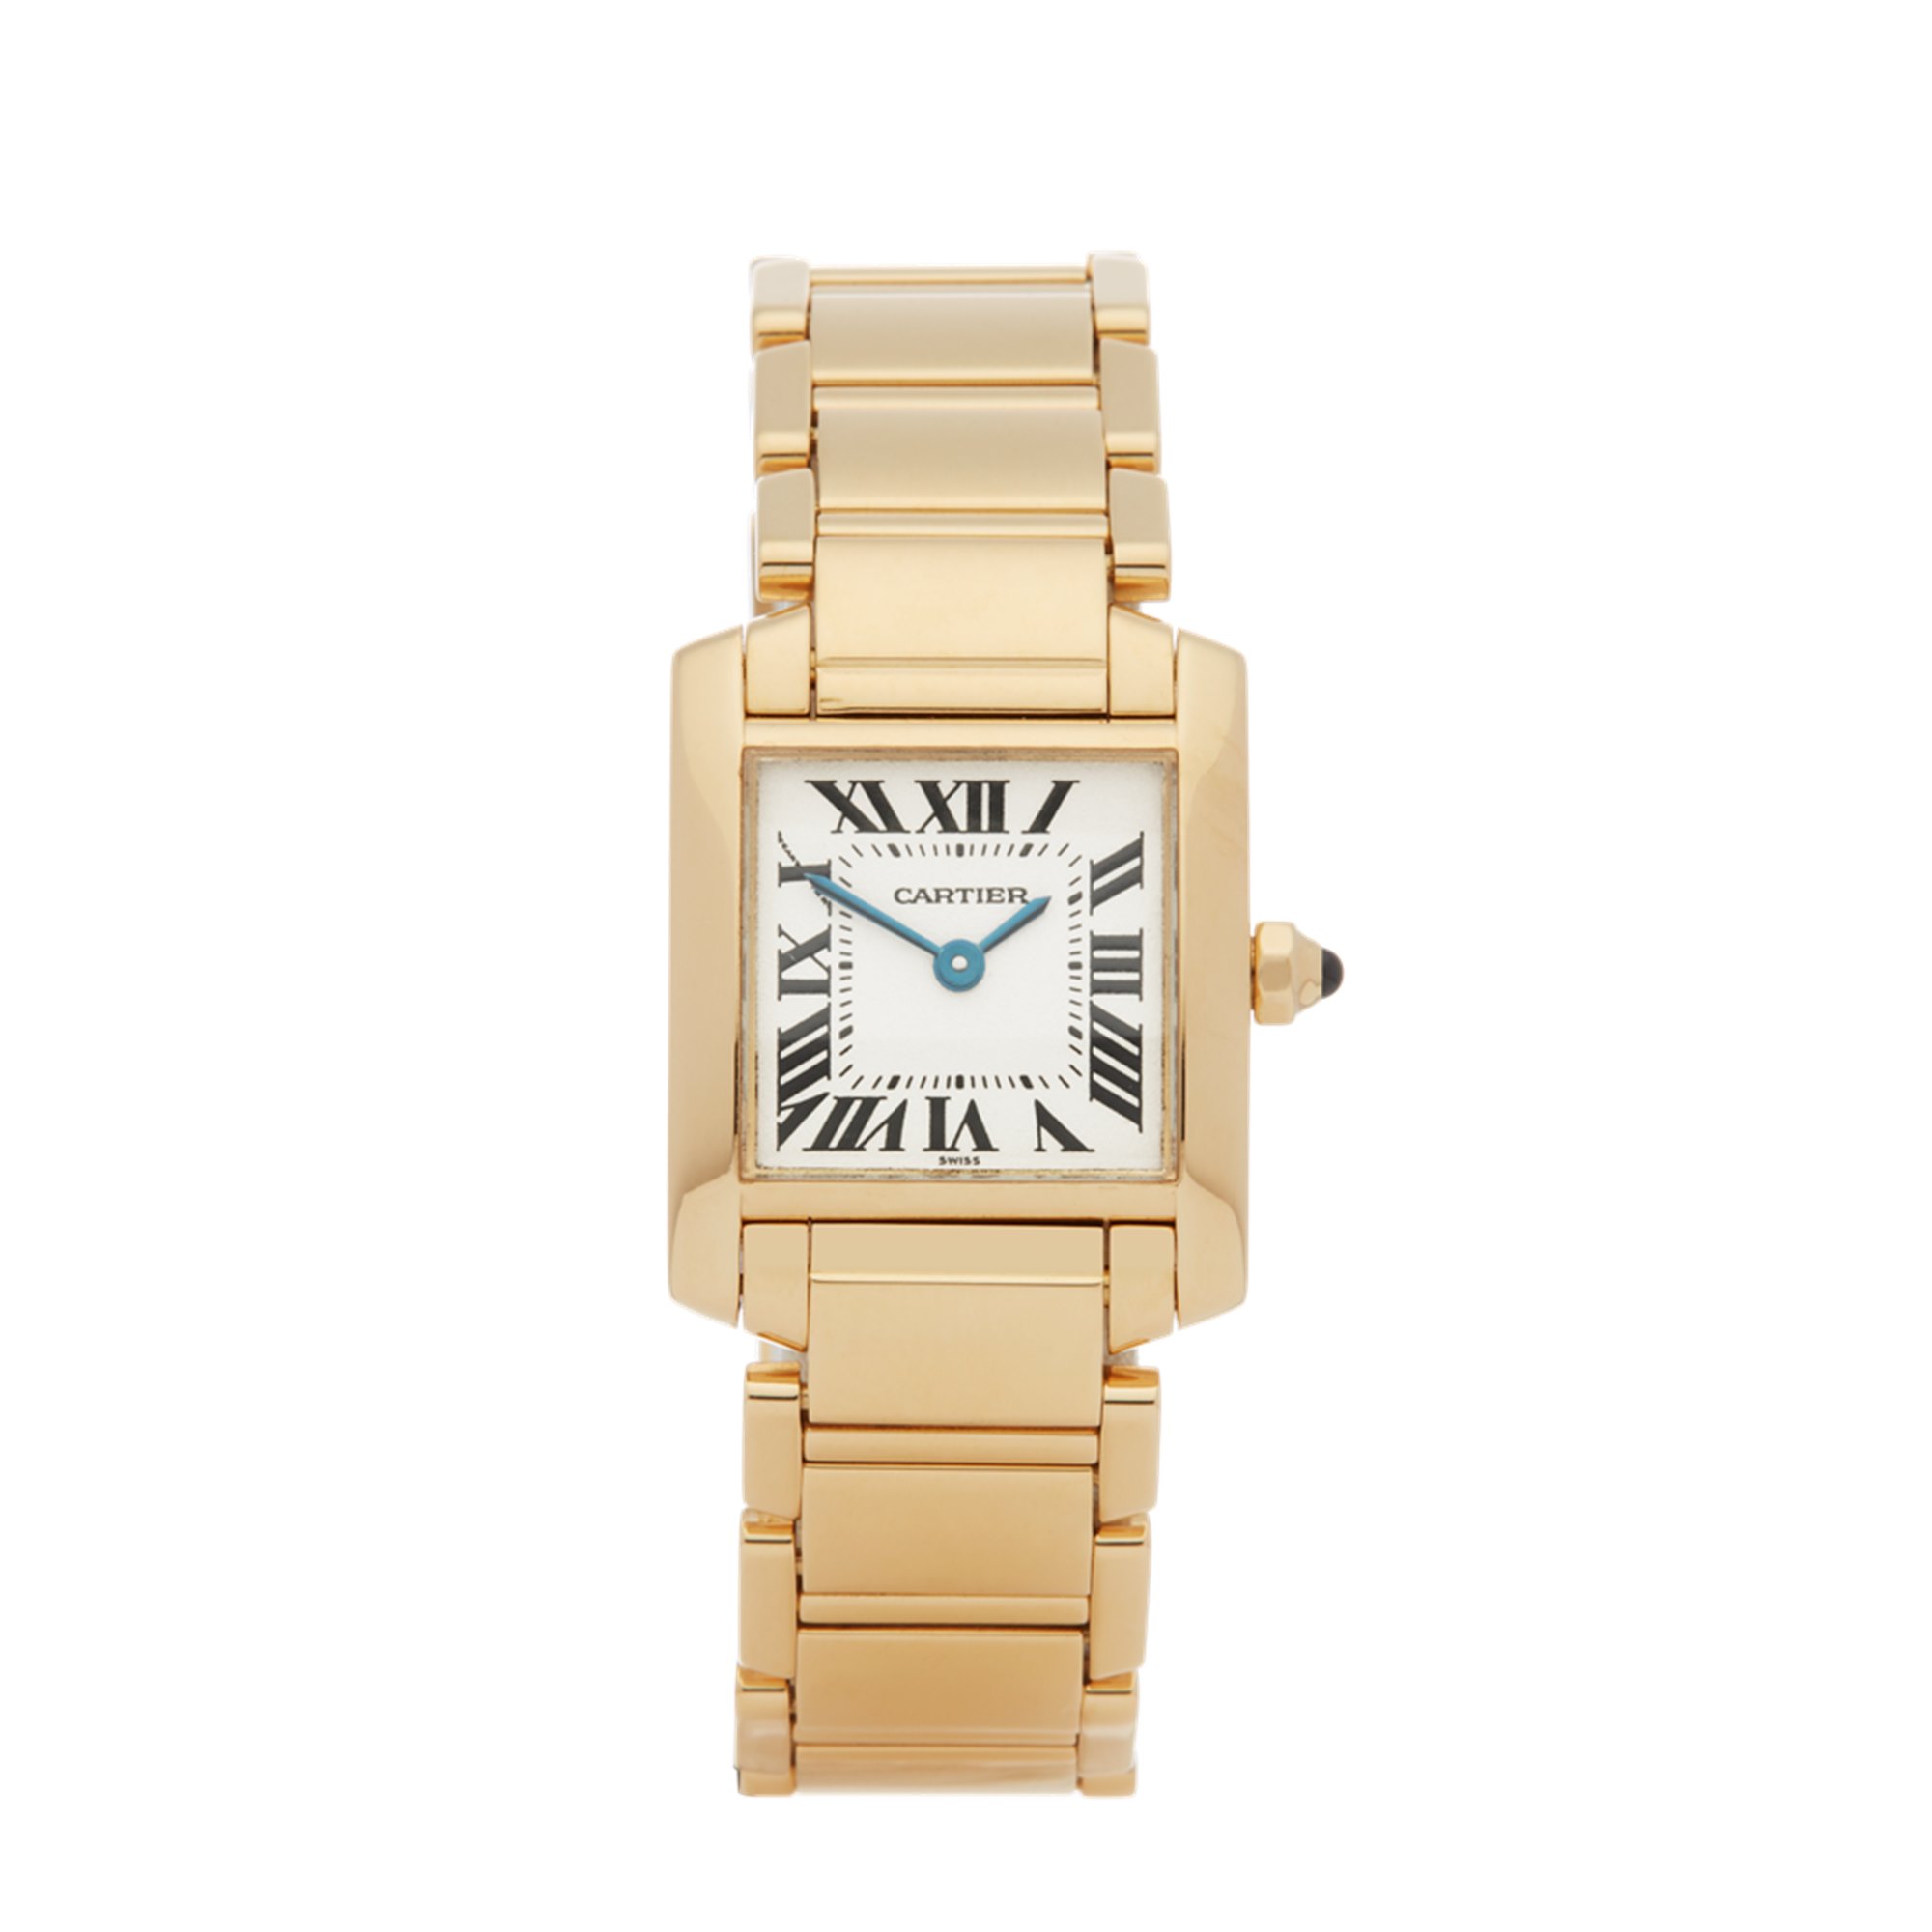 used cartier tank francaise ladies